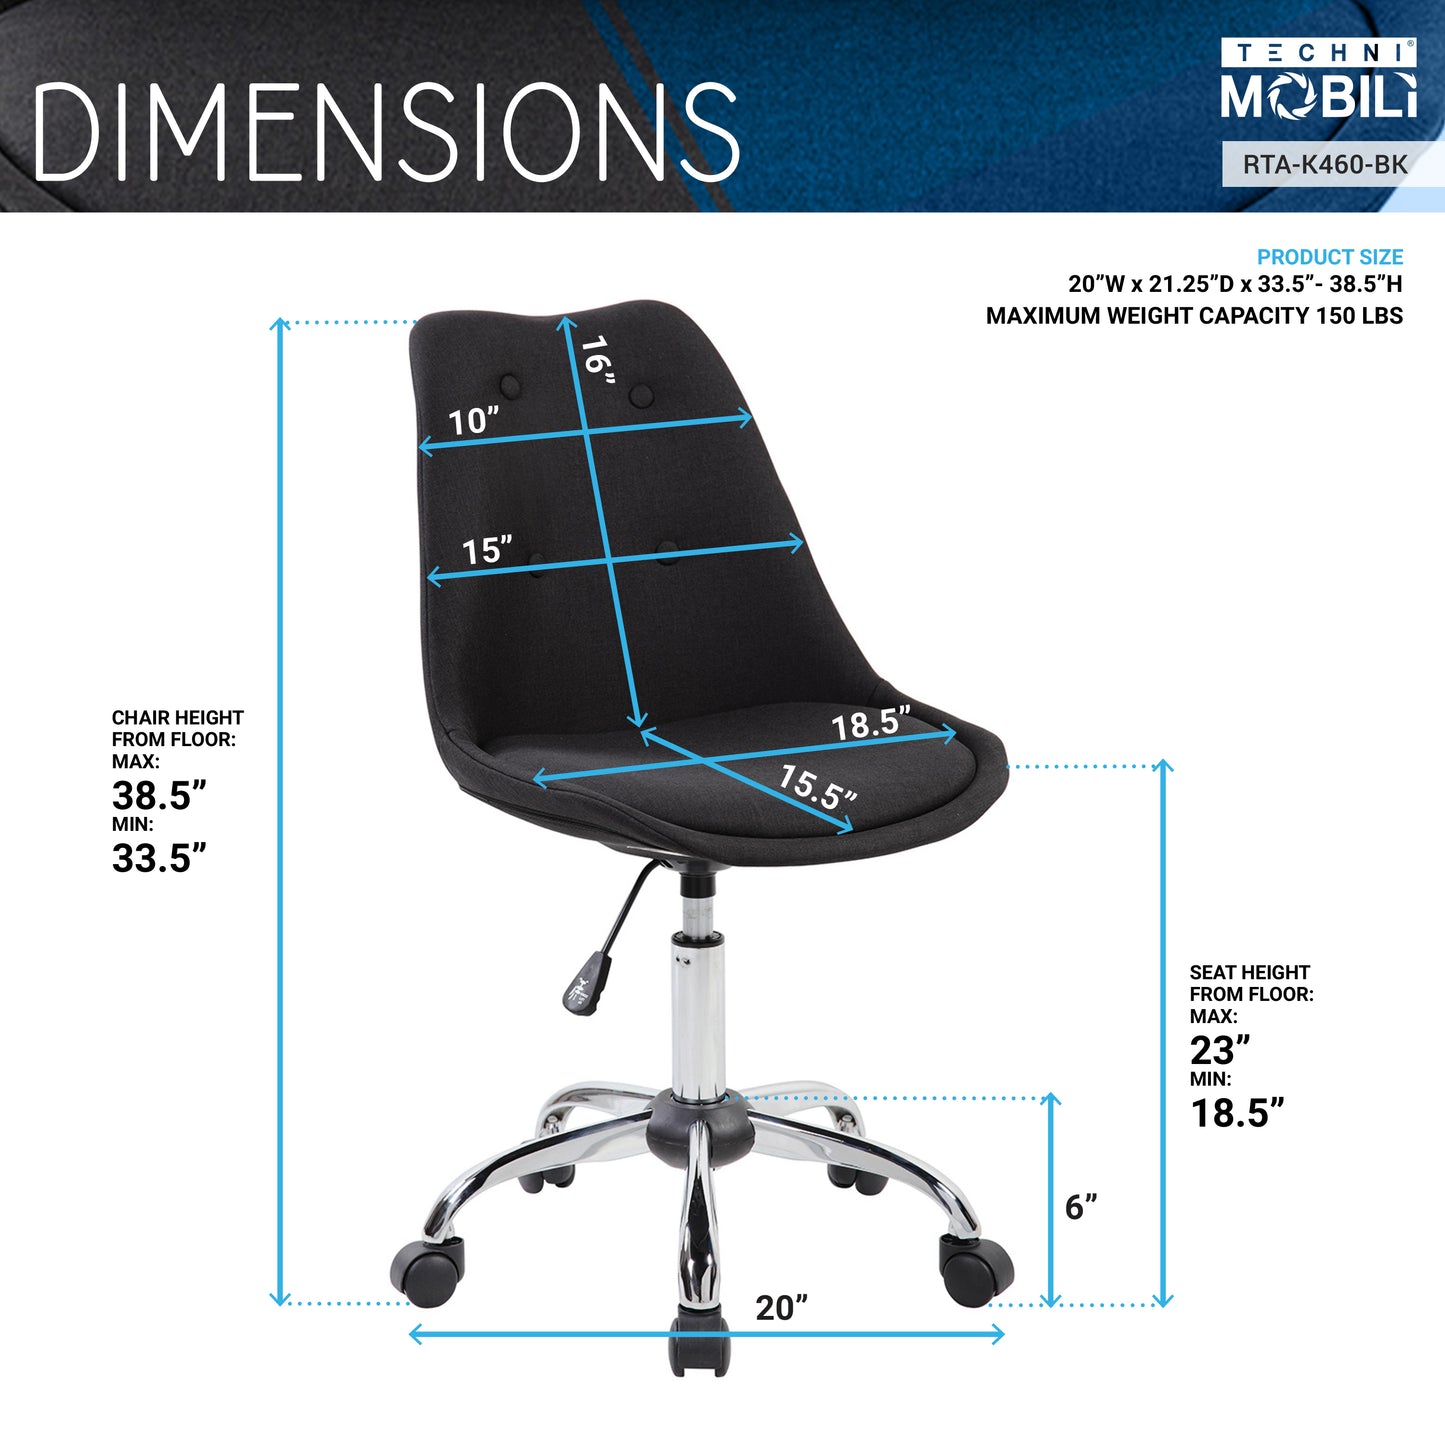 Armless Task Chair with Buttons, Black